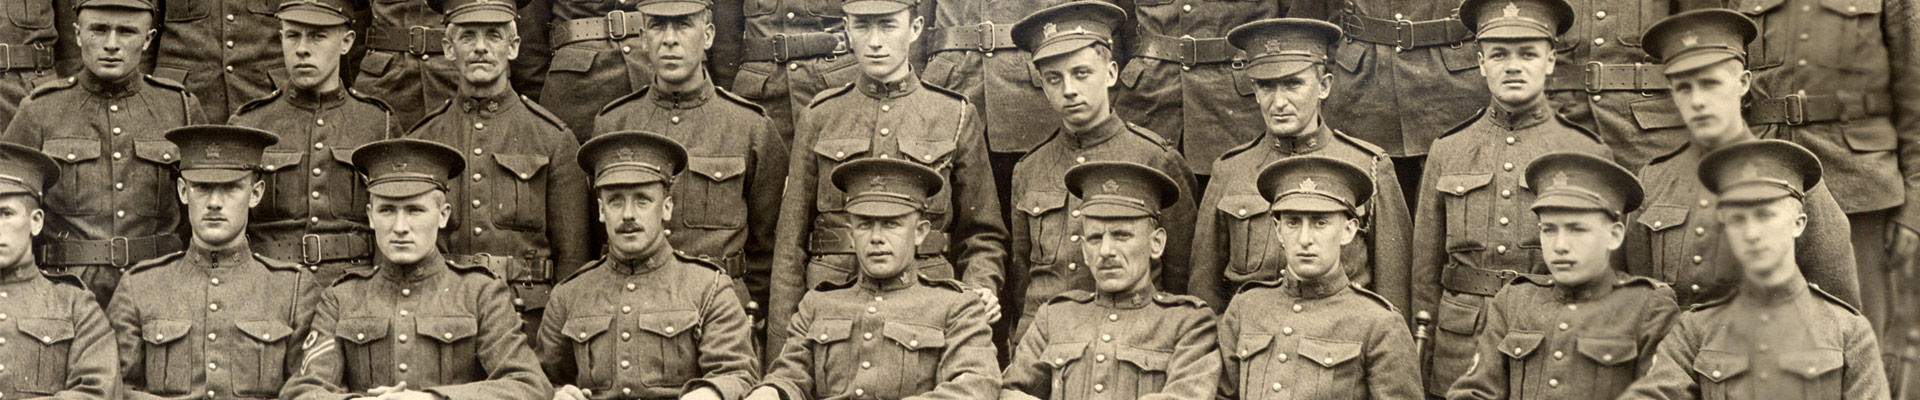 Canadian Soldiers posing for a group image